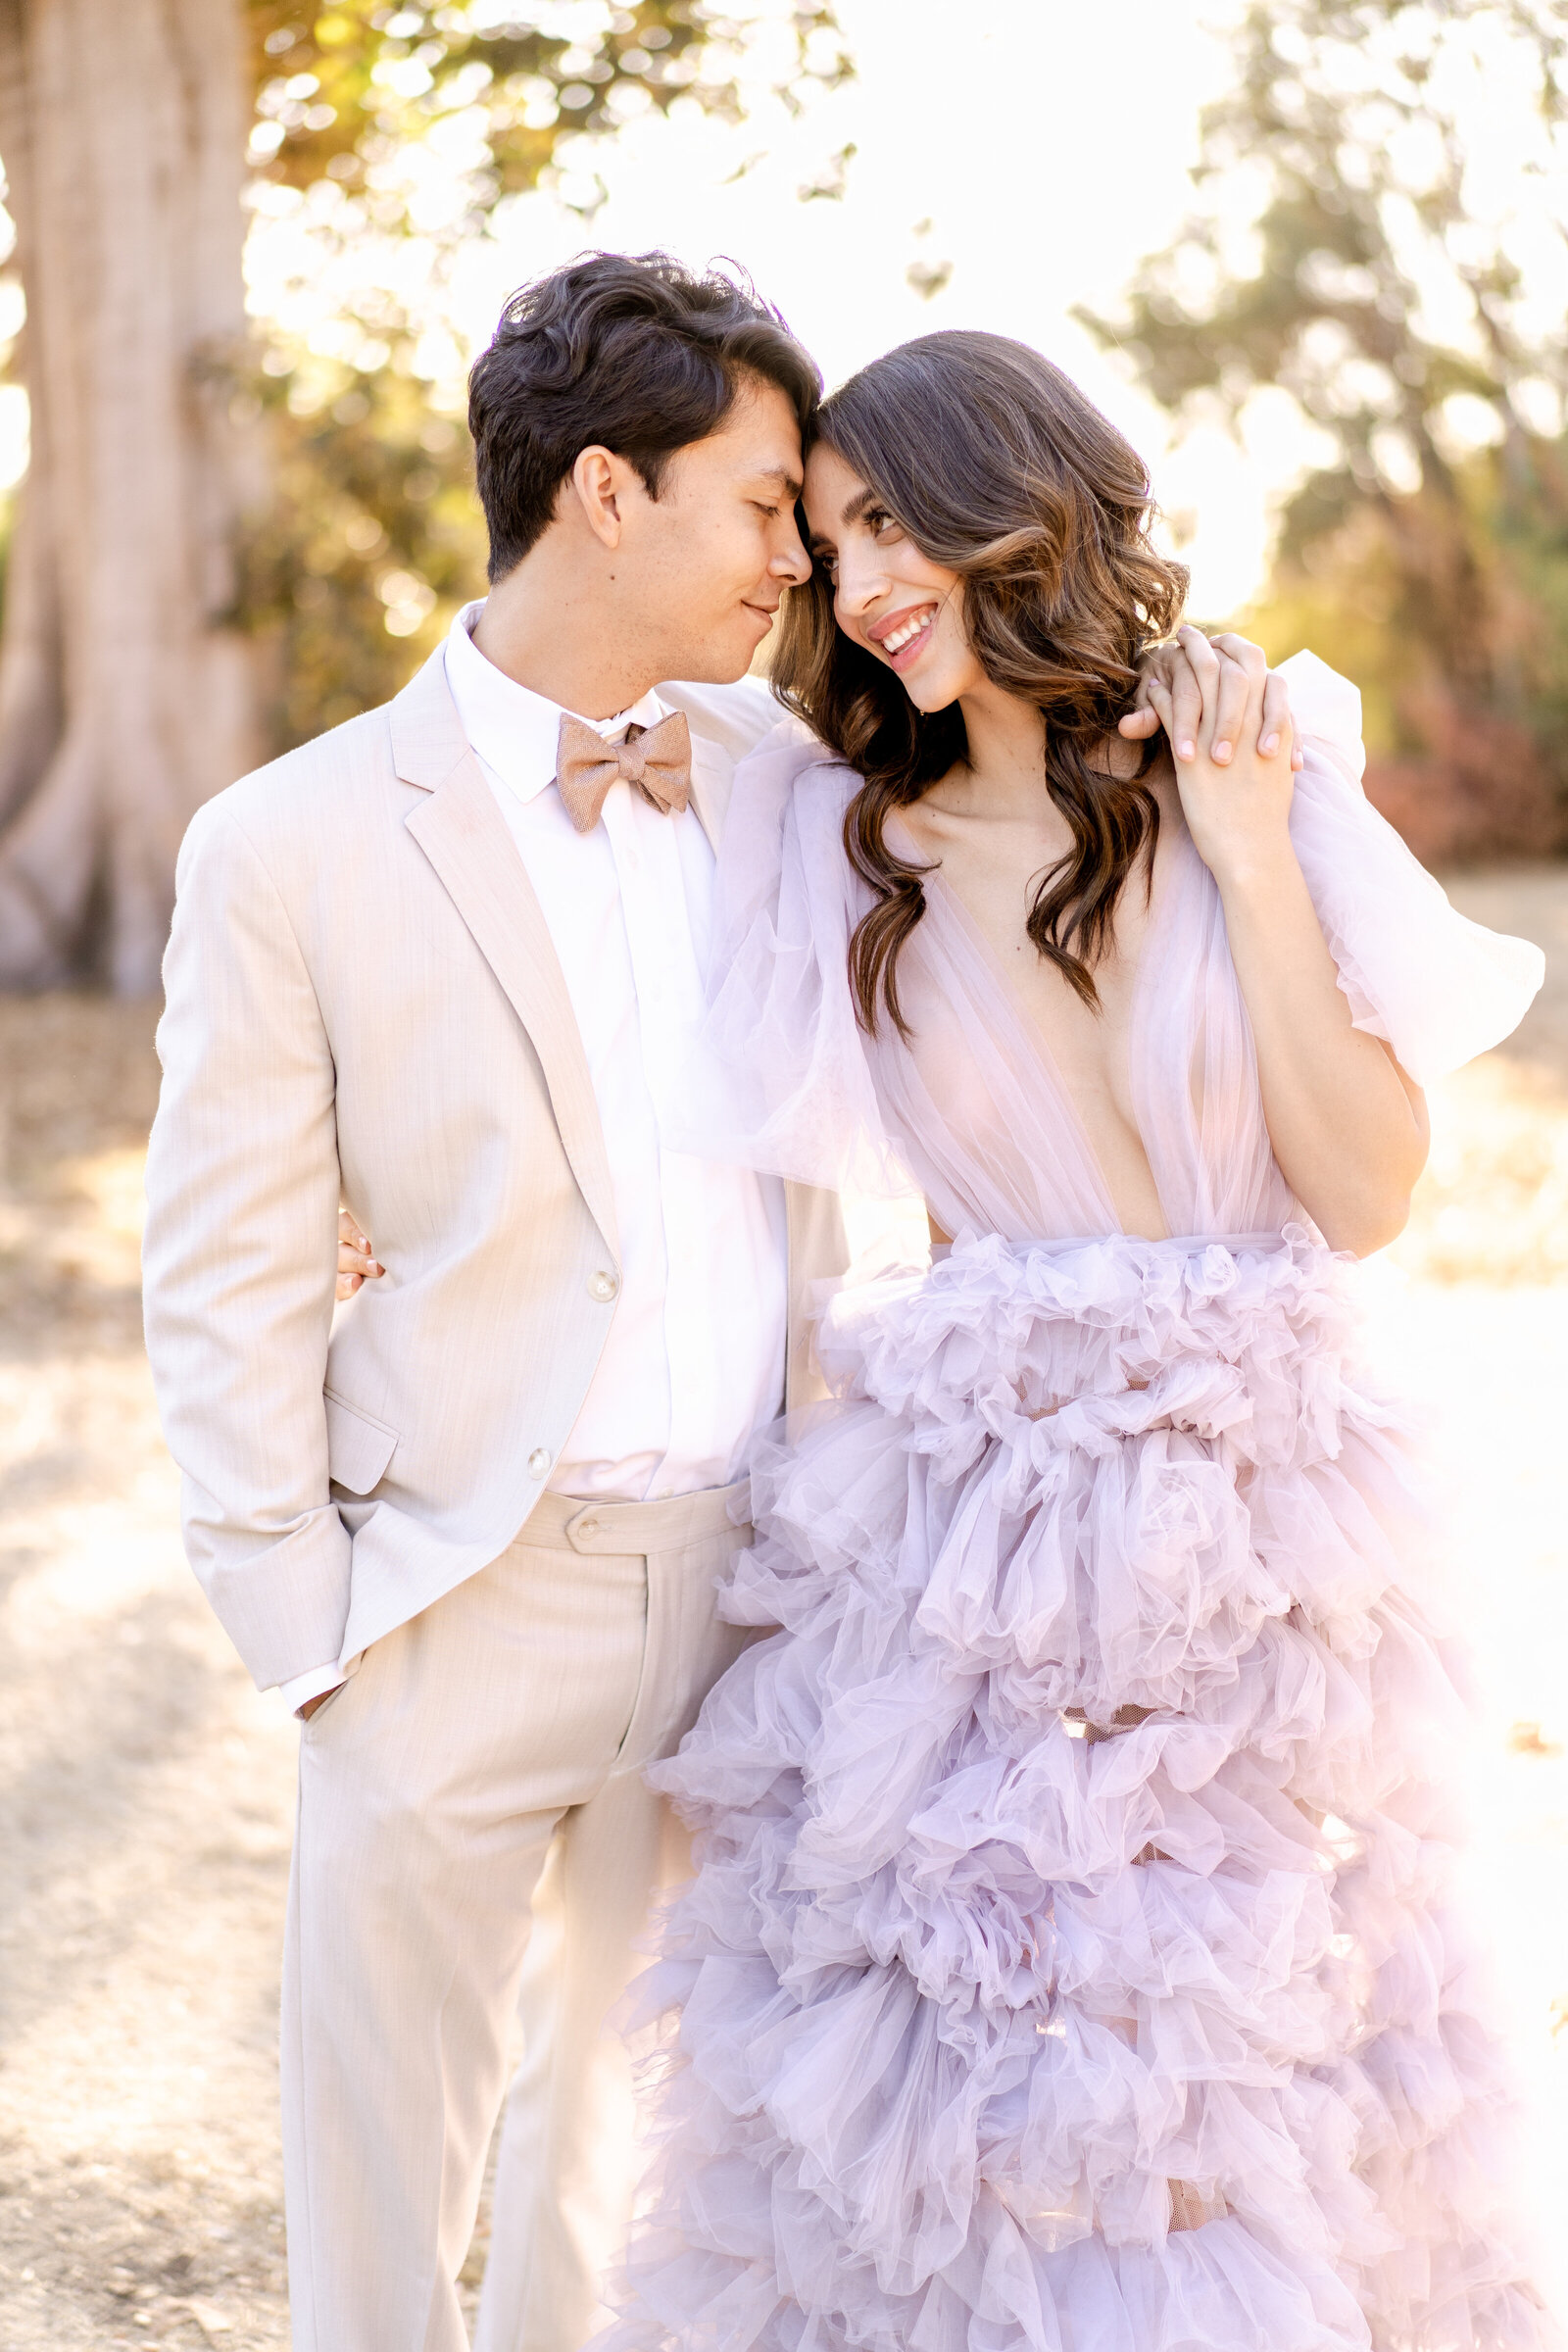 Portrait of bride and groom in a lavender gown and cream suit outdoors.